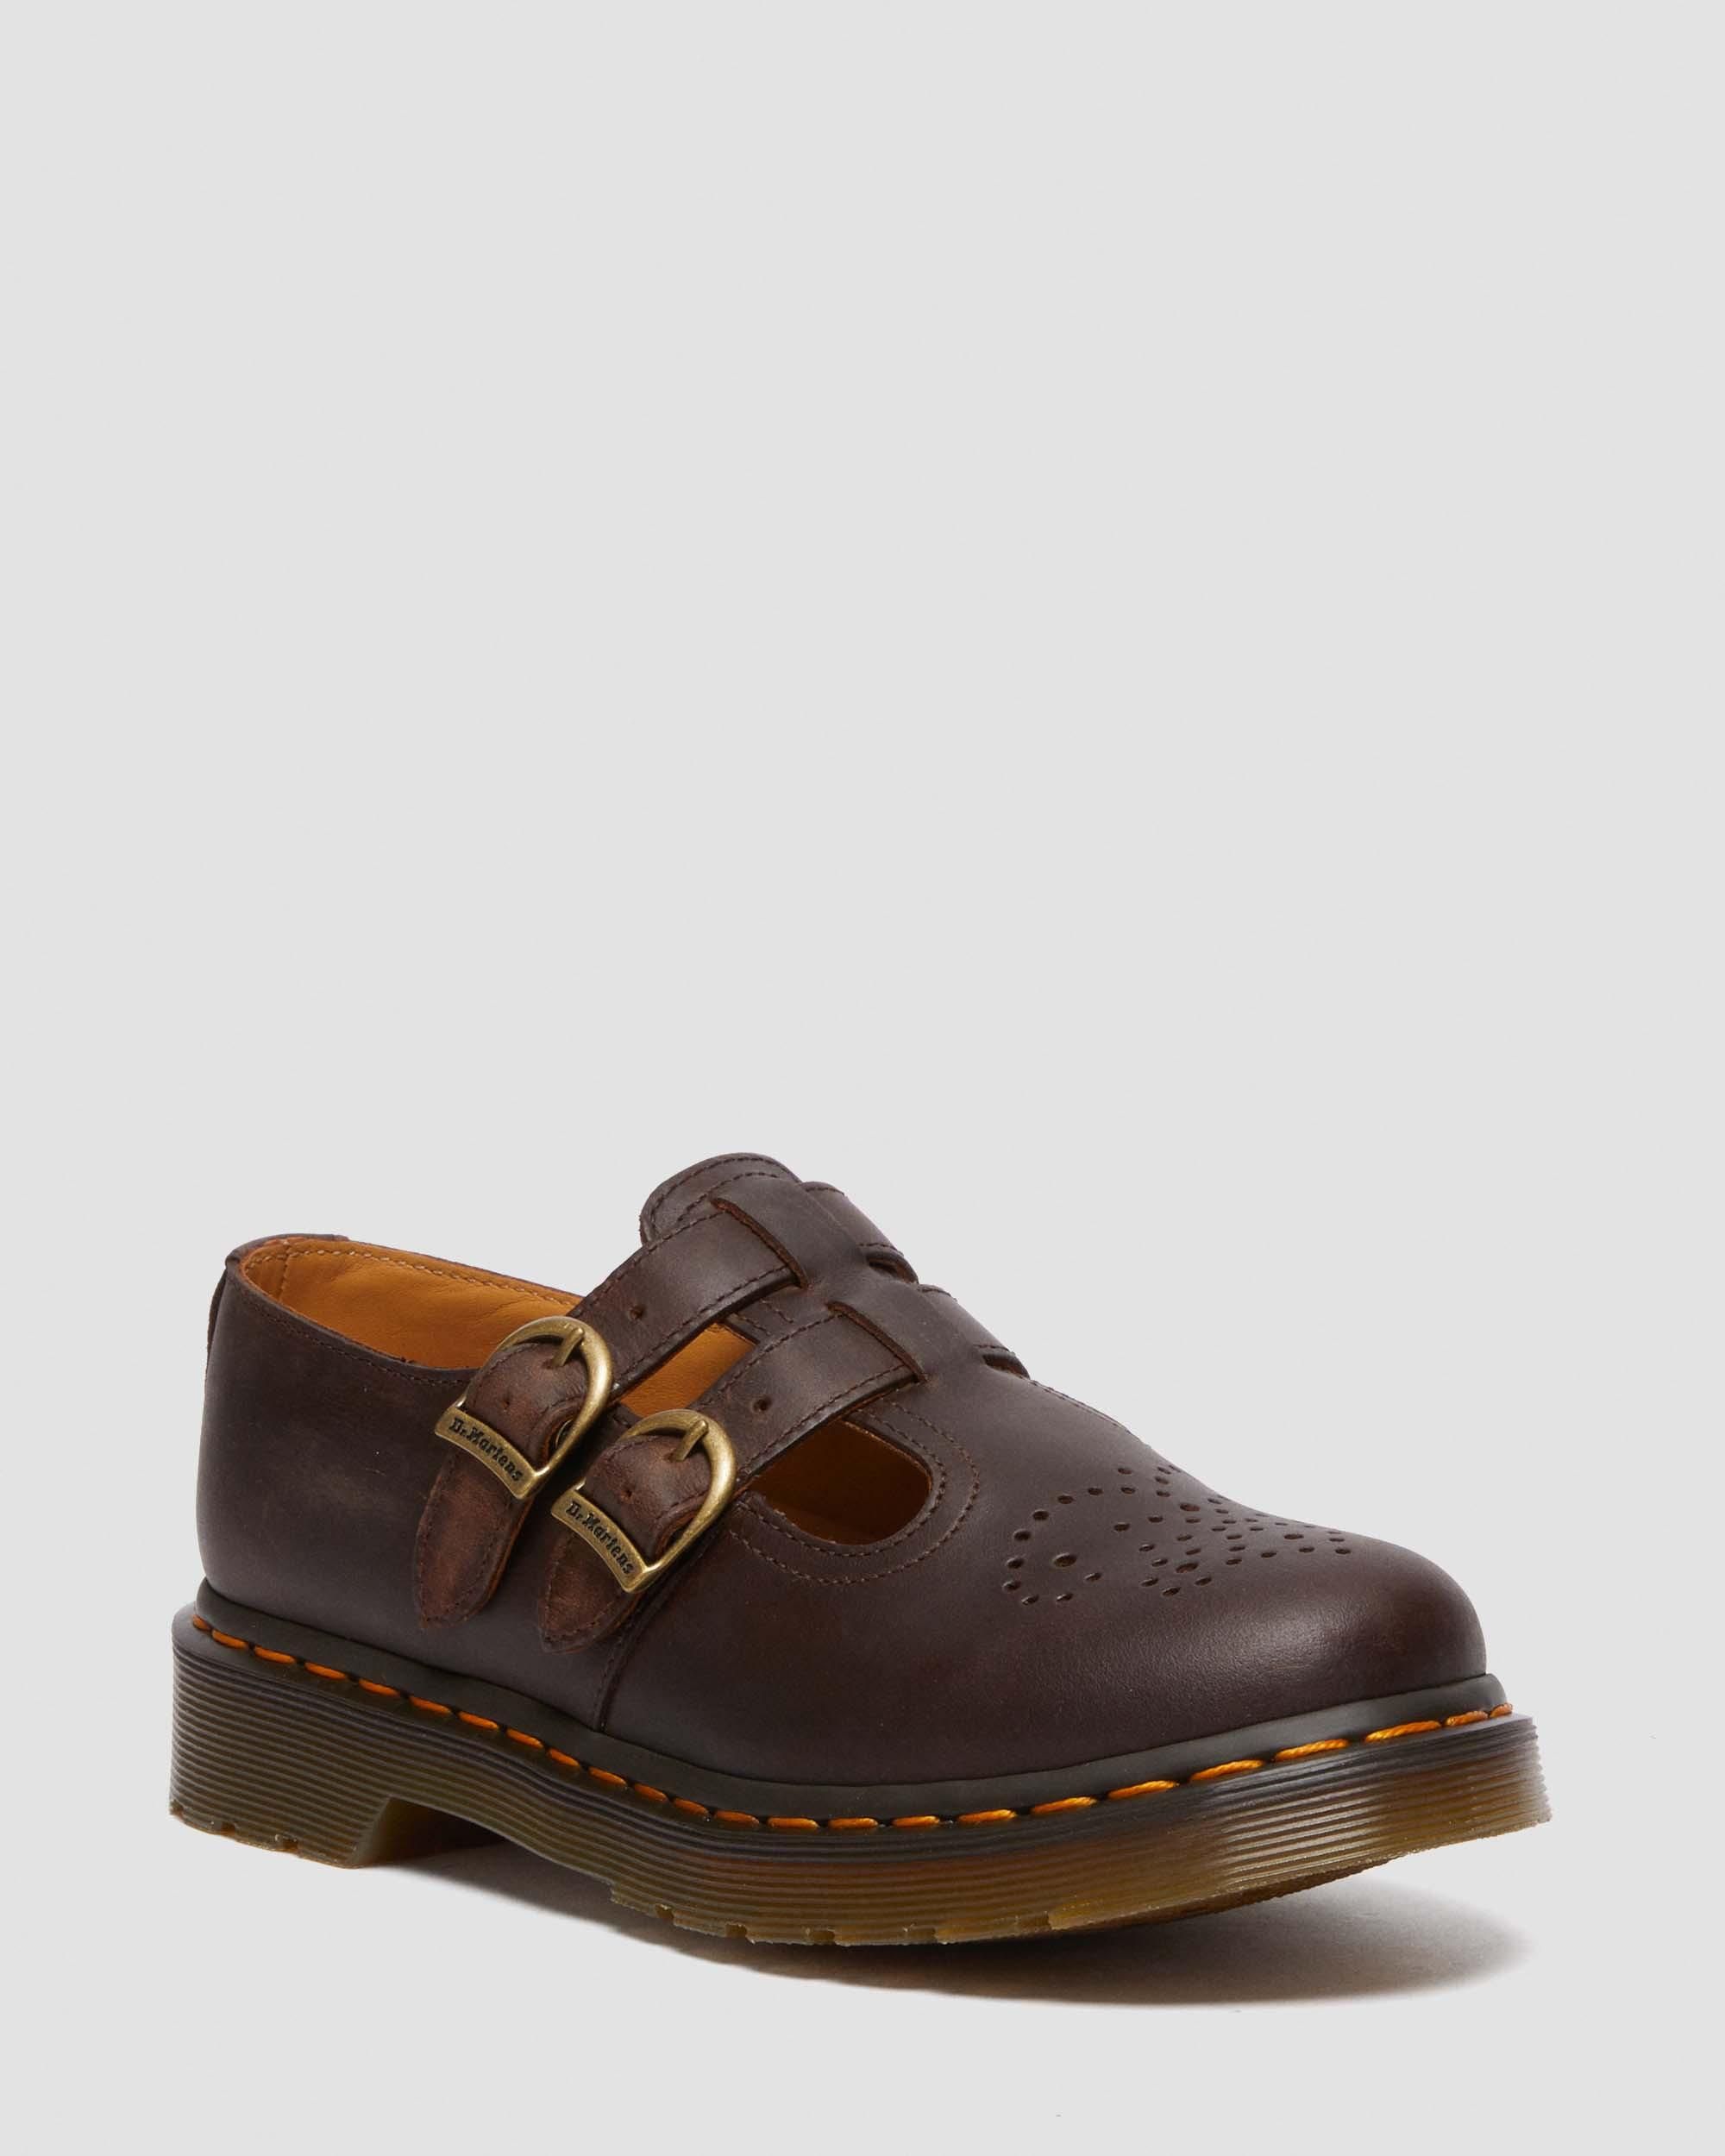 8065 Crazy Horse Leather Mary Jane Shoes | Dr. Martens